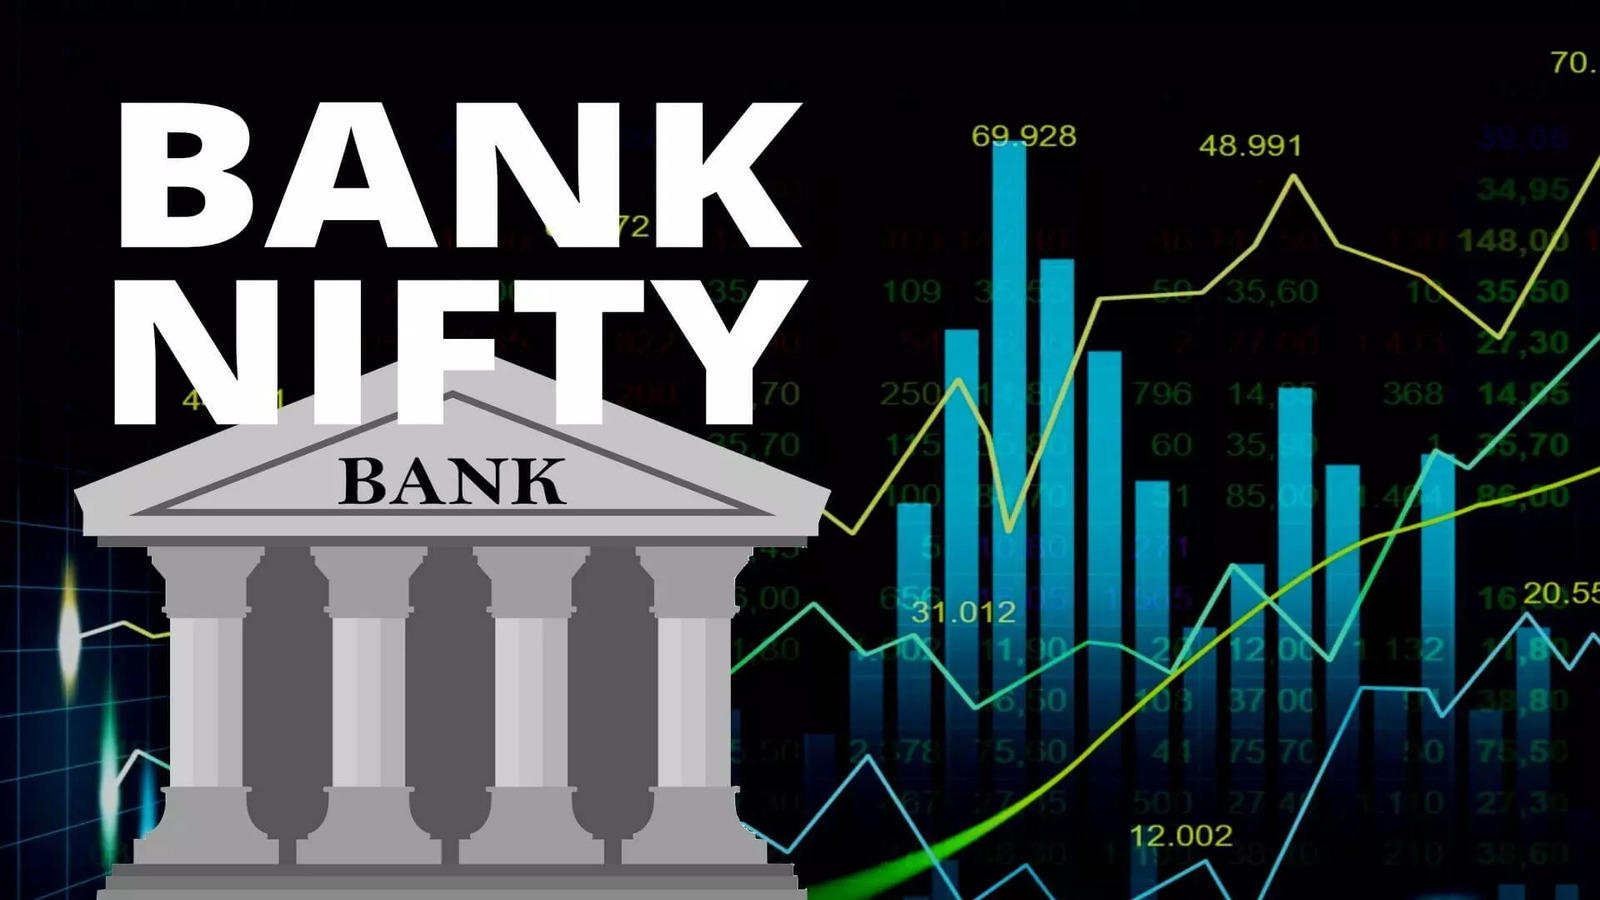 Bank nifty soars past 50,000 on expiry day; base call writing shifts resistance to 50,500 strike